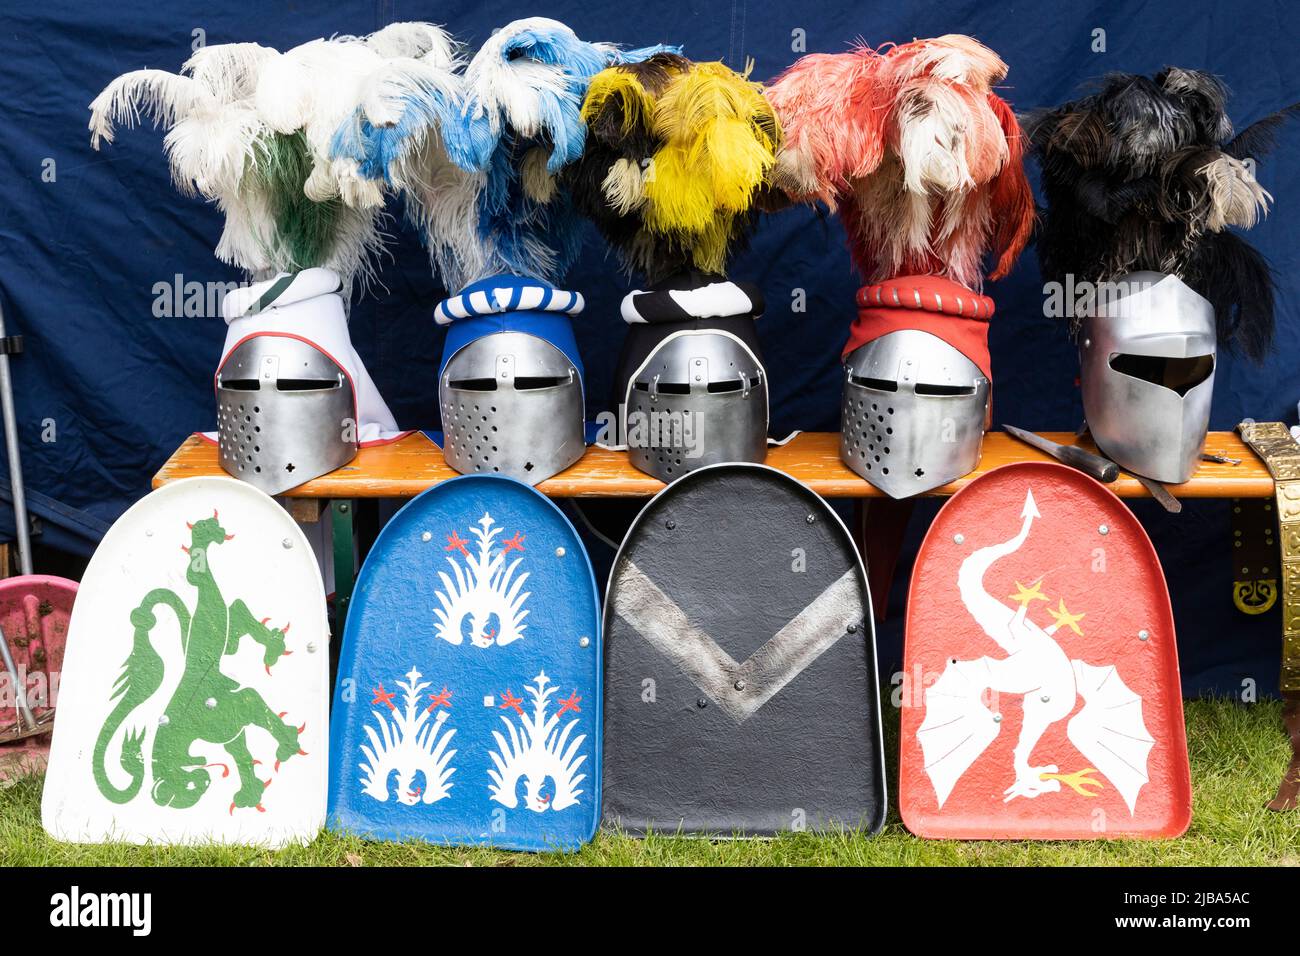 Pfingst-Spektakulum in Muelheim an der Ruhr, Germany. Knights helmets with feathers and shields. Event with a medieval knights tournament with camp and crafts market in Müga-Park near Schloss Broich castle. Stock Photo